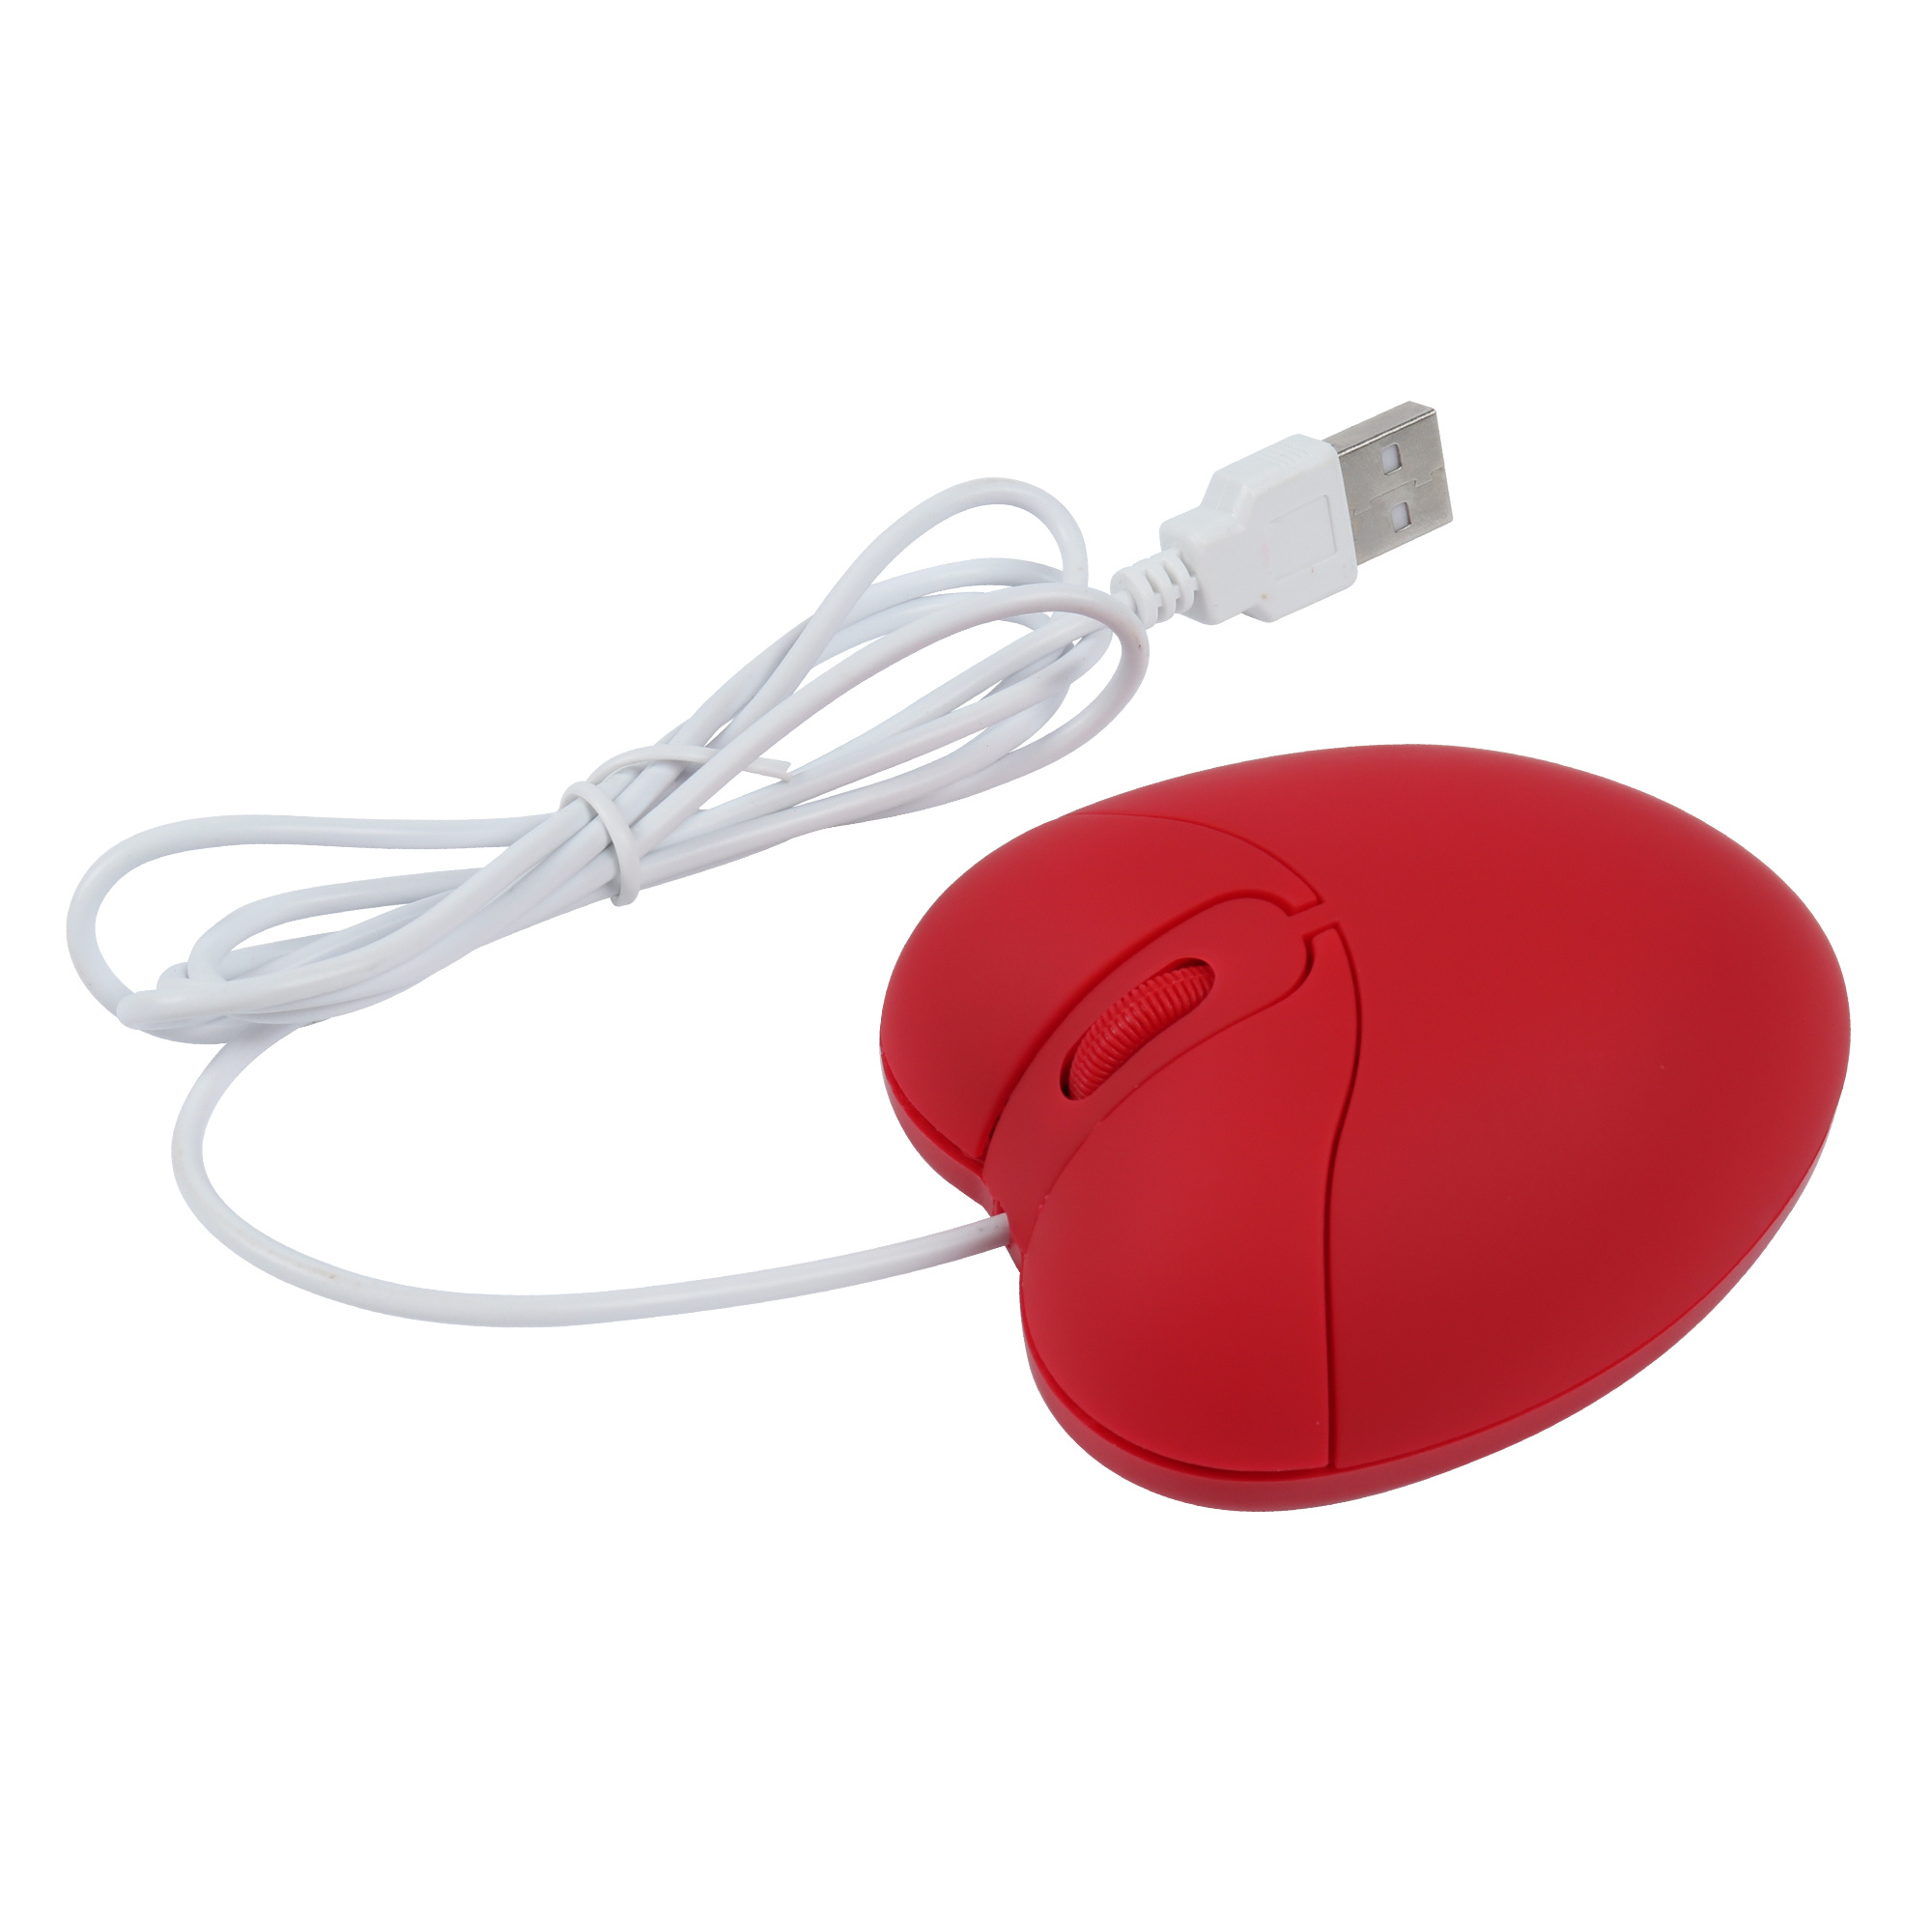 Computer-Wired-Mouse-USB-Optical-Creative-Gaming-Cute-Mause-Ergonomic-Love-Heart-3D-Mice-For-Laptop (6)